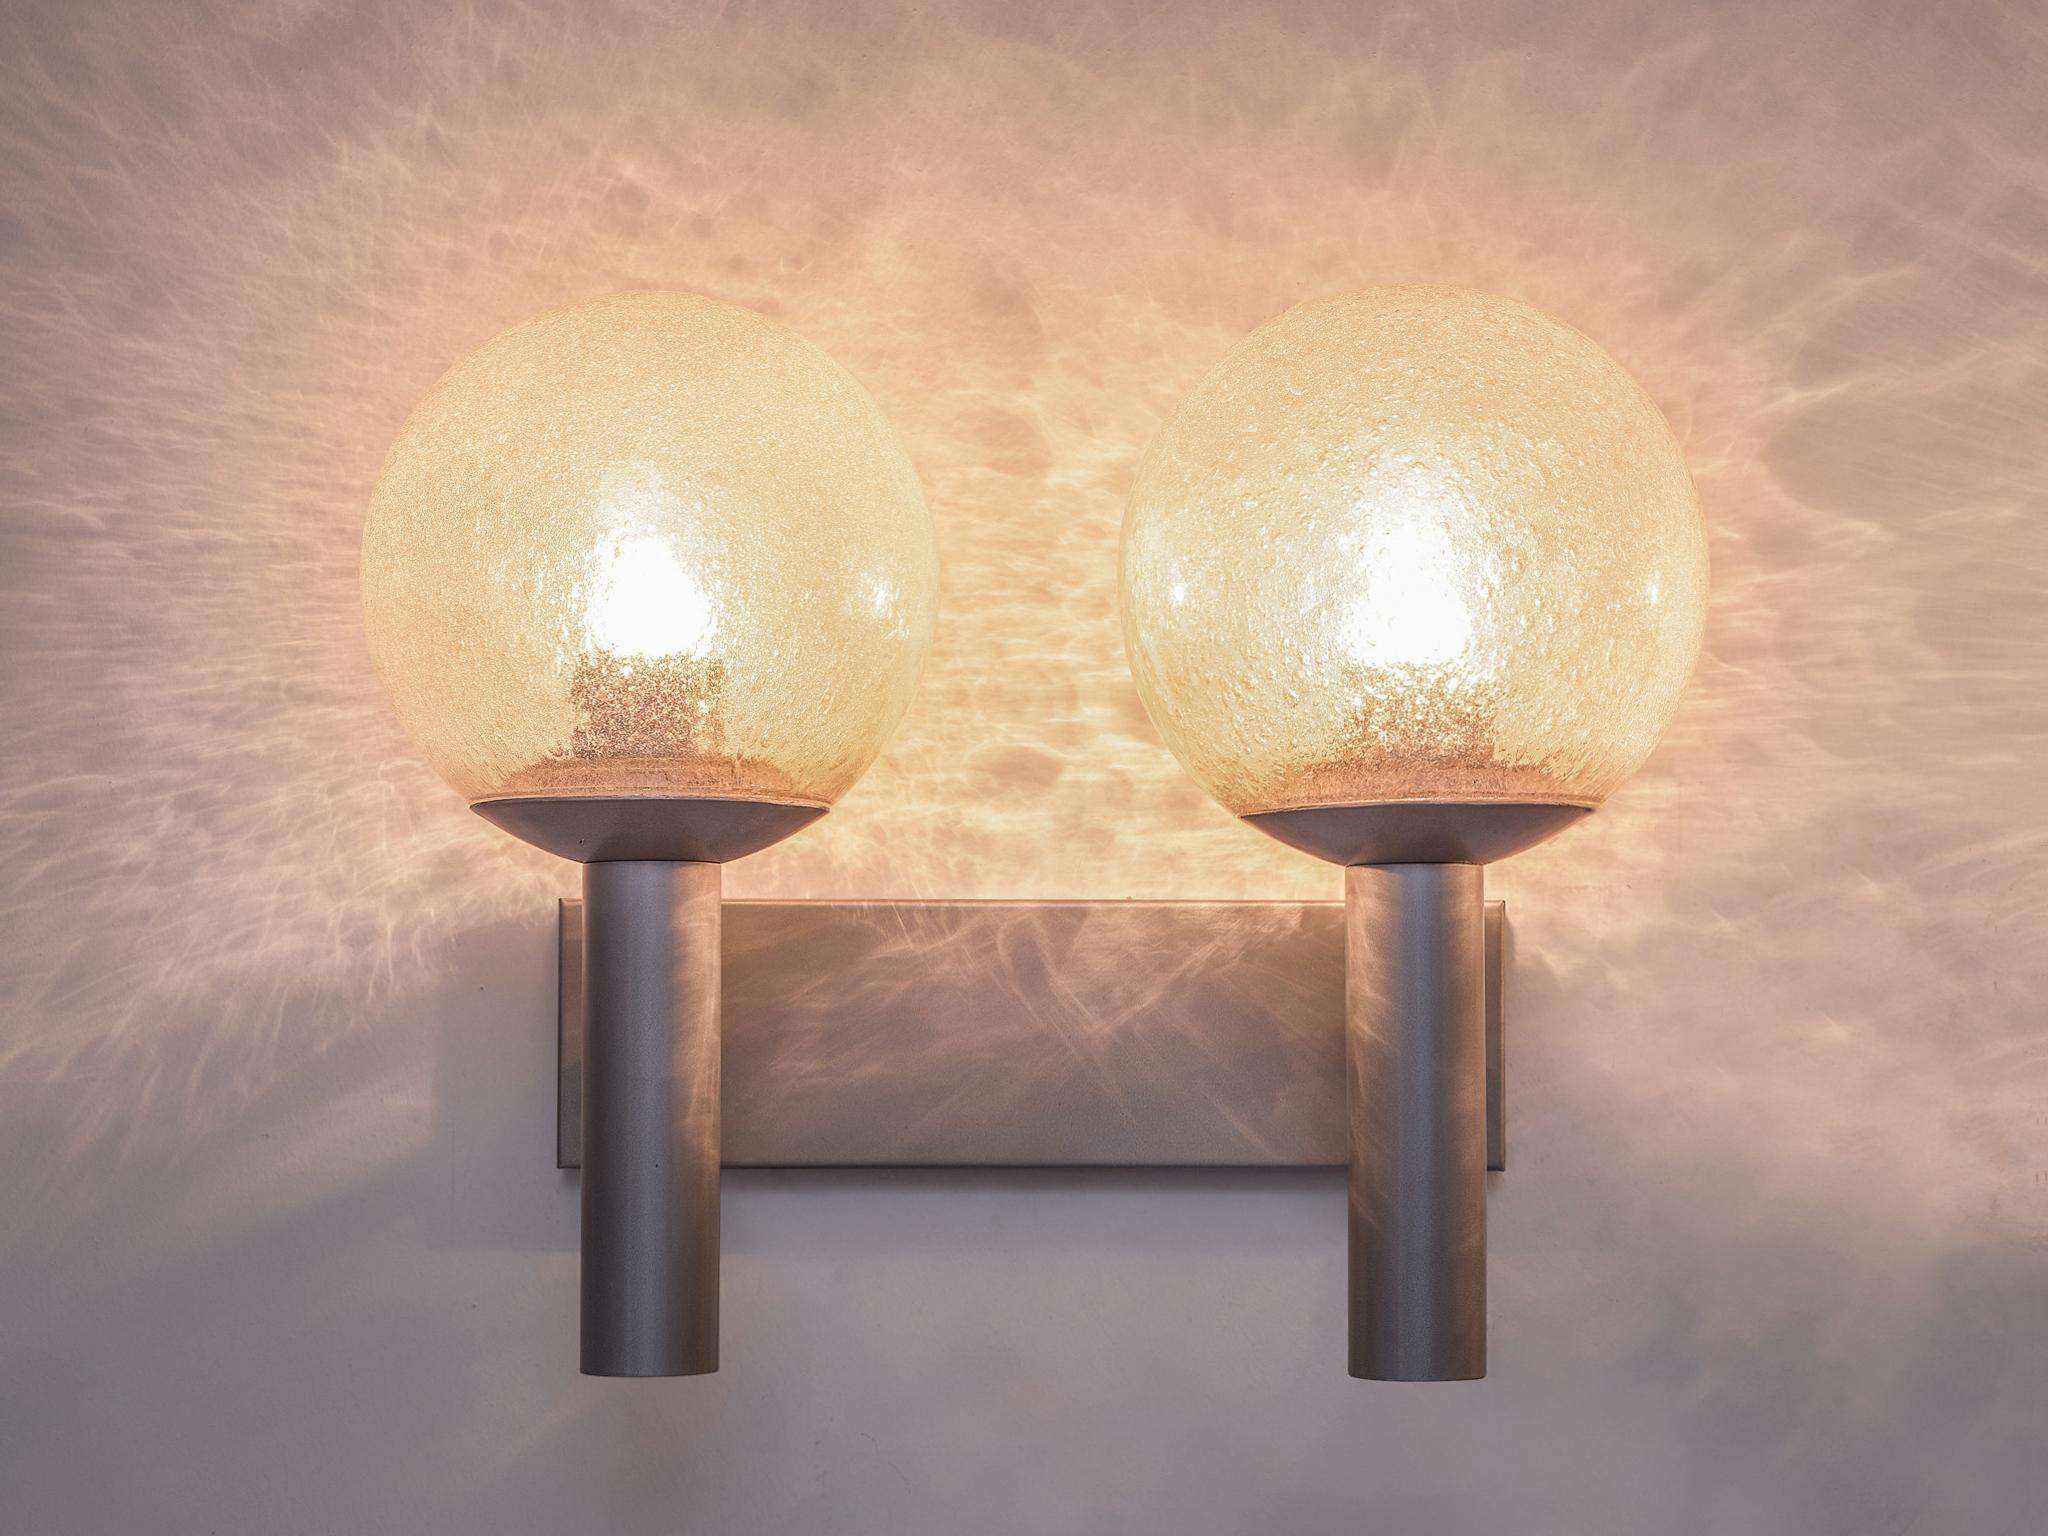 RAAK, pair of wall sconces, model 'C-1663' Vigilante, metal, glass, Europe, 1960s.

These lights have a simplistic design. It's strength is in the combination of the forms and materials. The fixture consists of a plate to which two tubes are